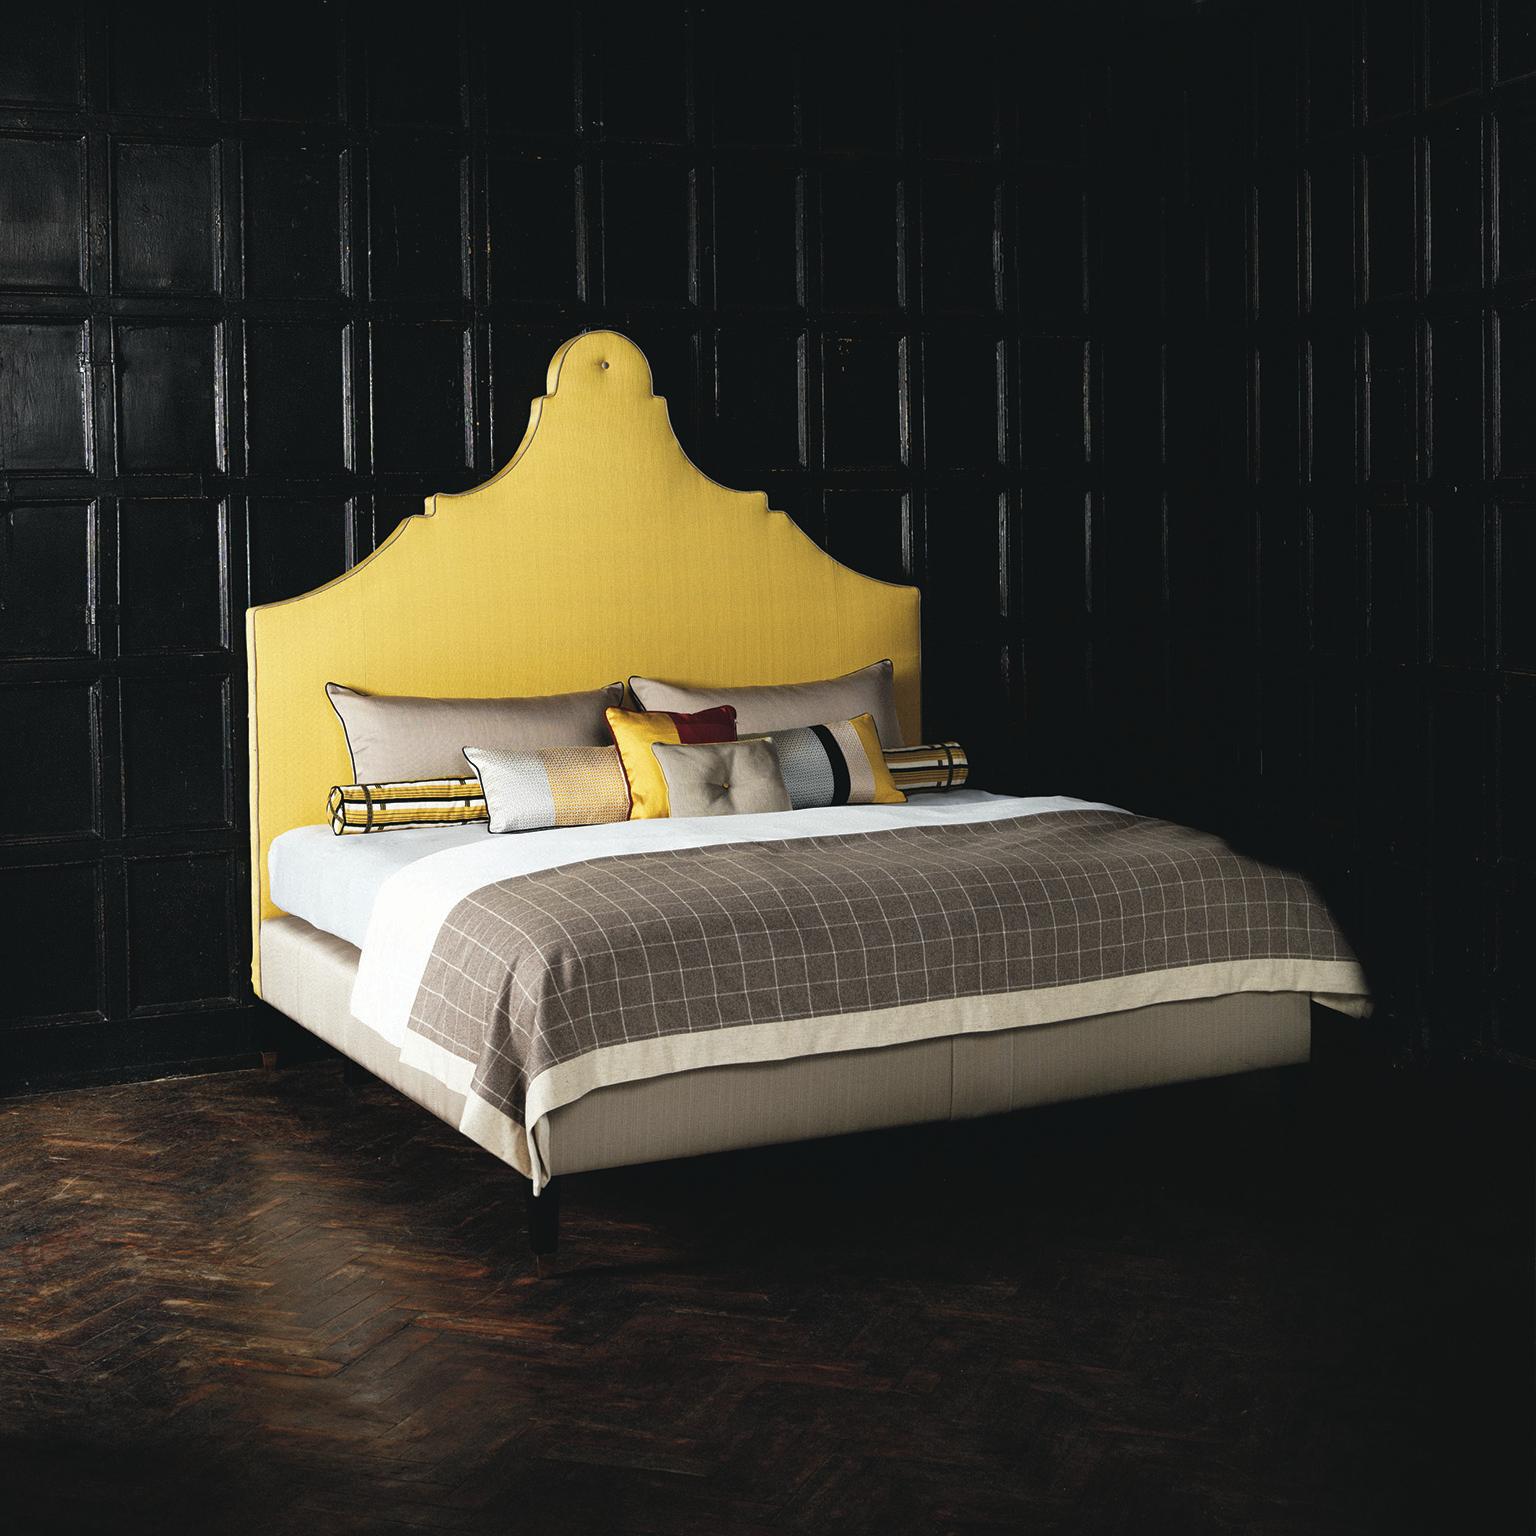 A traditionally shaped headboard with elegant curves and an eye-catching colour palette, the Claudia bed makes a statement. Upholstered in lemon yellow with a contrasting taupe base, the design is finished with crisp piping and a feature button.